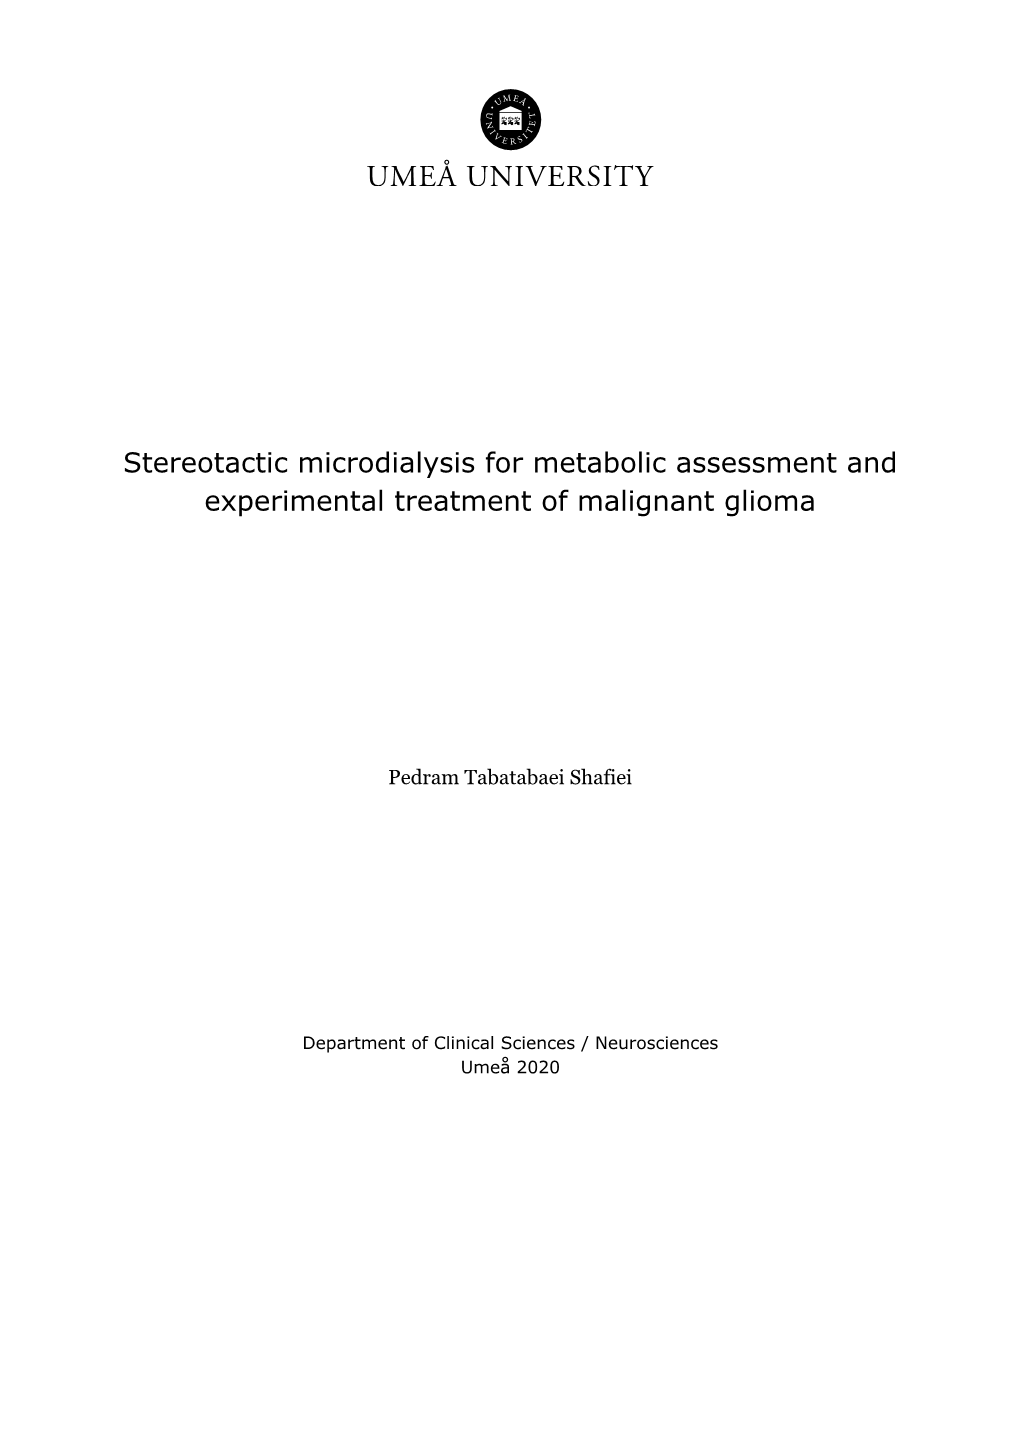 Stereotactic Microdialysis for Metabolic Assessment and Experimental Treatment of Malignant Glioma